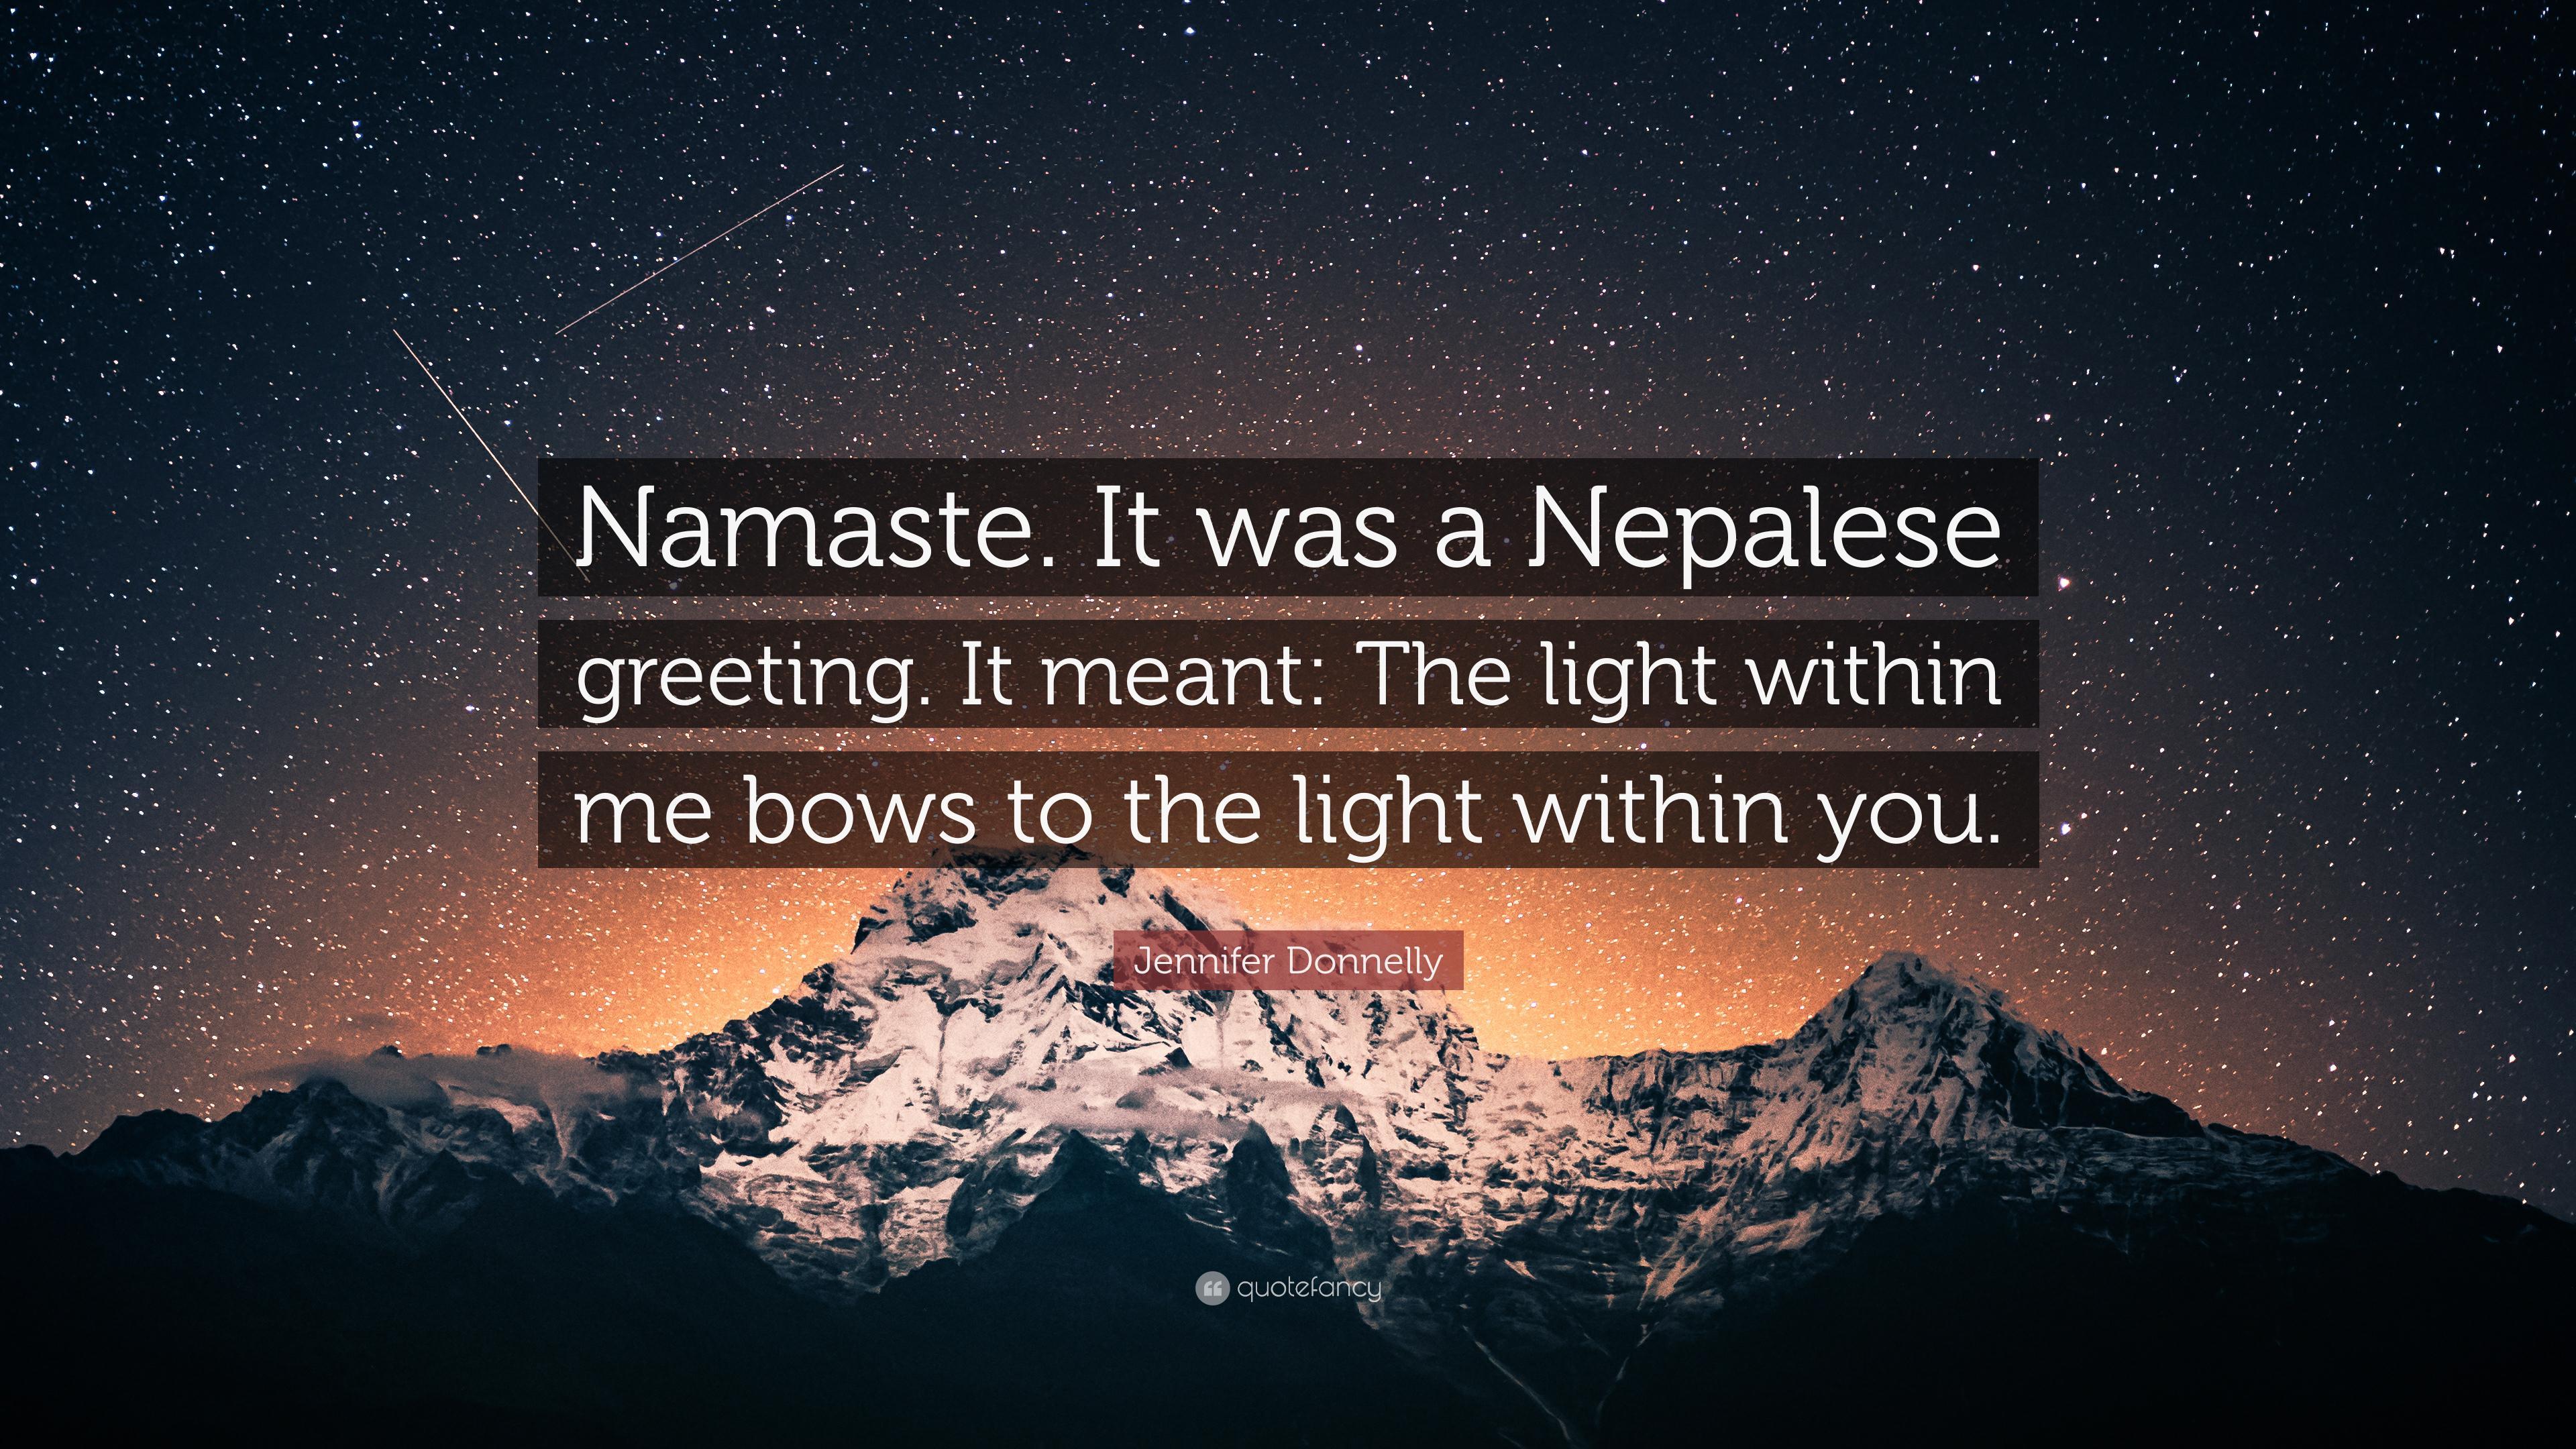 Jennifer Donnelly Quote: “Namaste. It was a Nepalese greeting. It